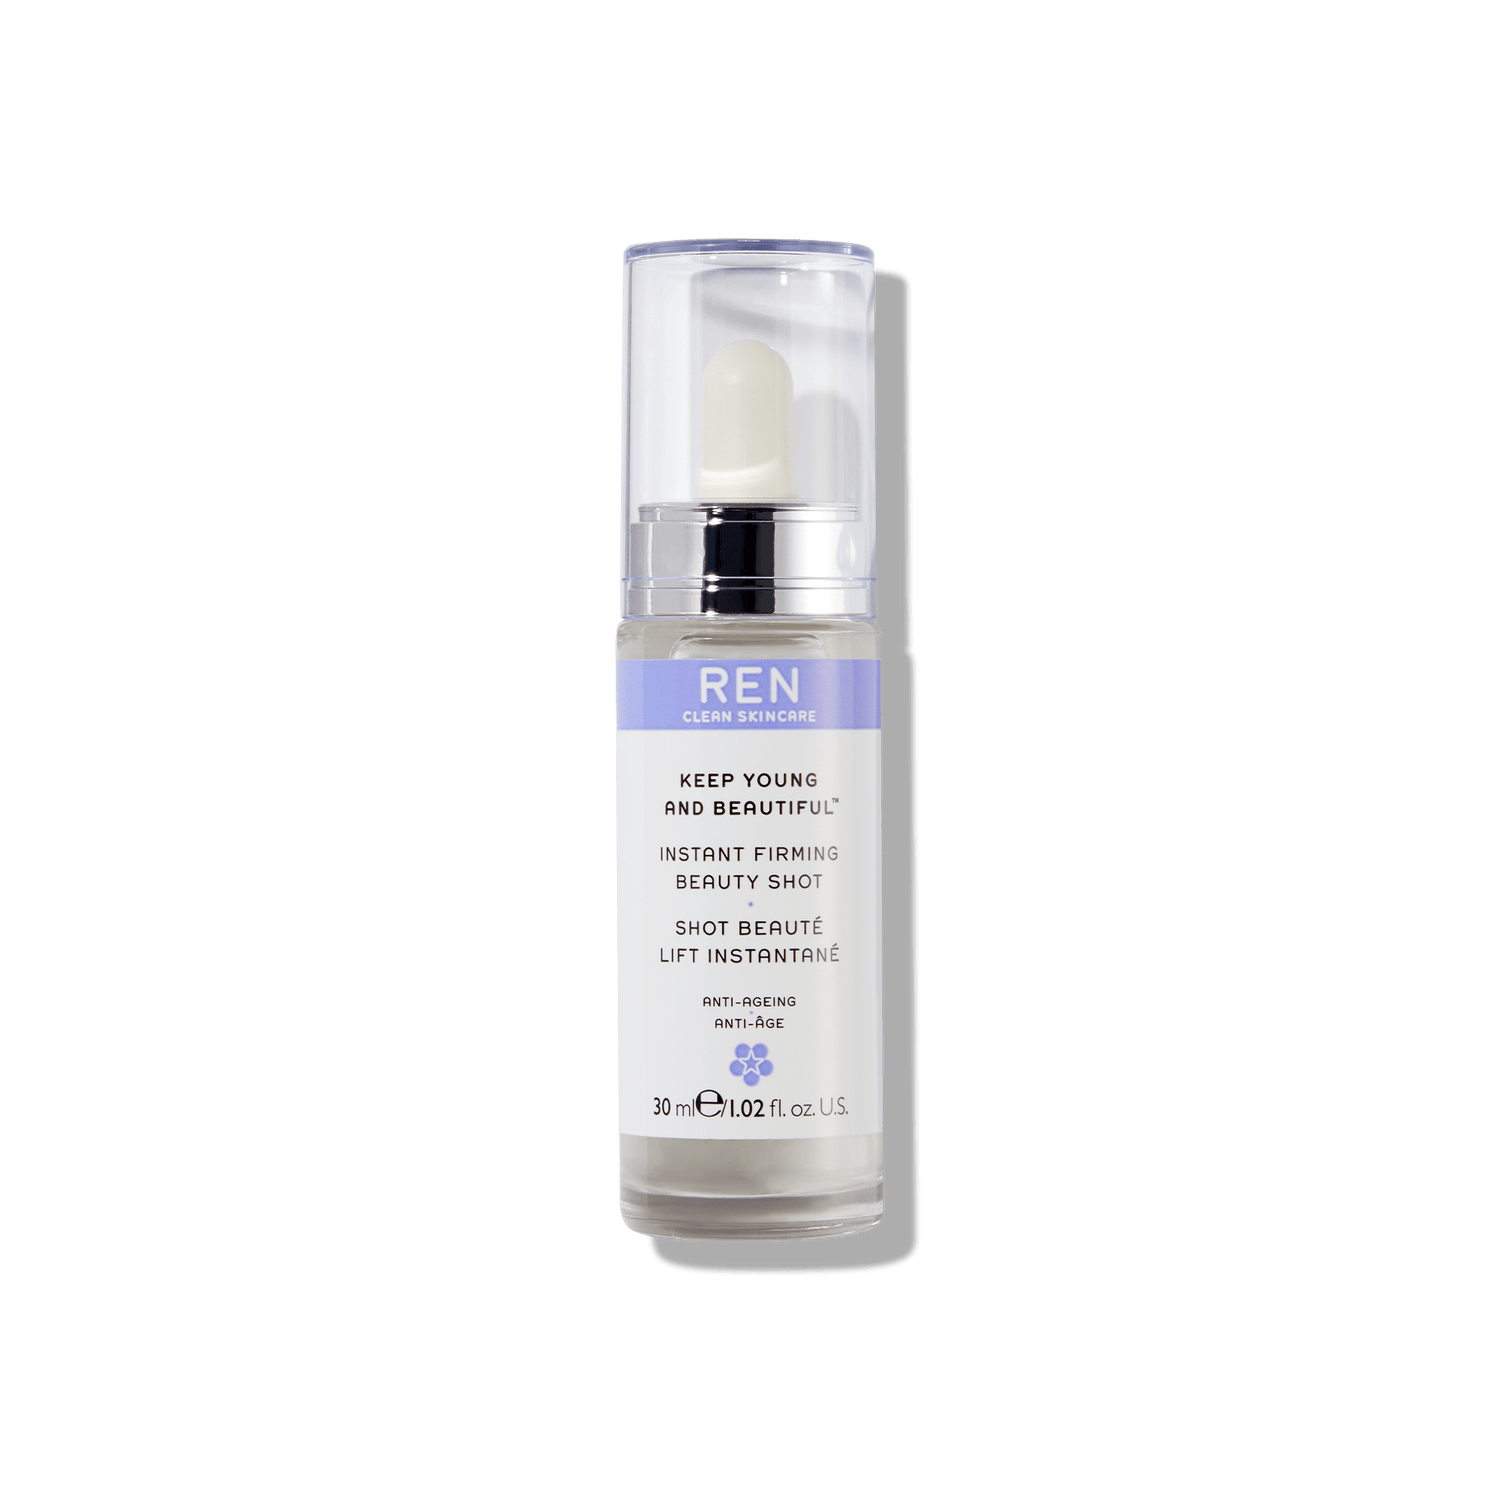 REN Clean Skincare - Anti-Aging Firming Face Serum Instantly Firms for Younger Looking Skin - Beauty Shot Gel Plumps, Tightens and Reduces Fine Lines and Wrinkles - Hyaluronic Acid and Red Algae for Sensitive Skin